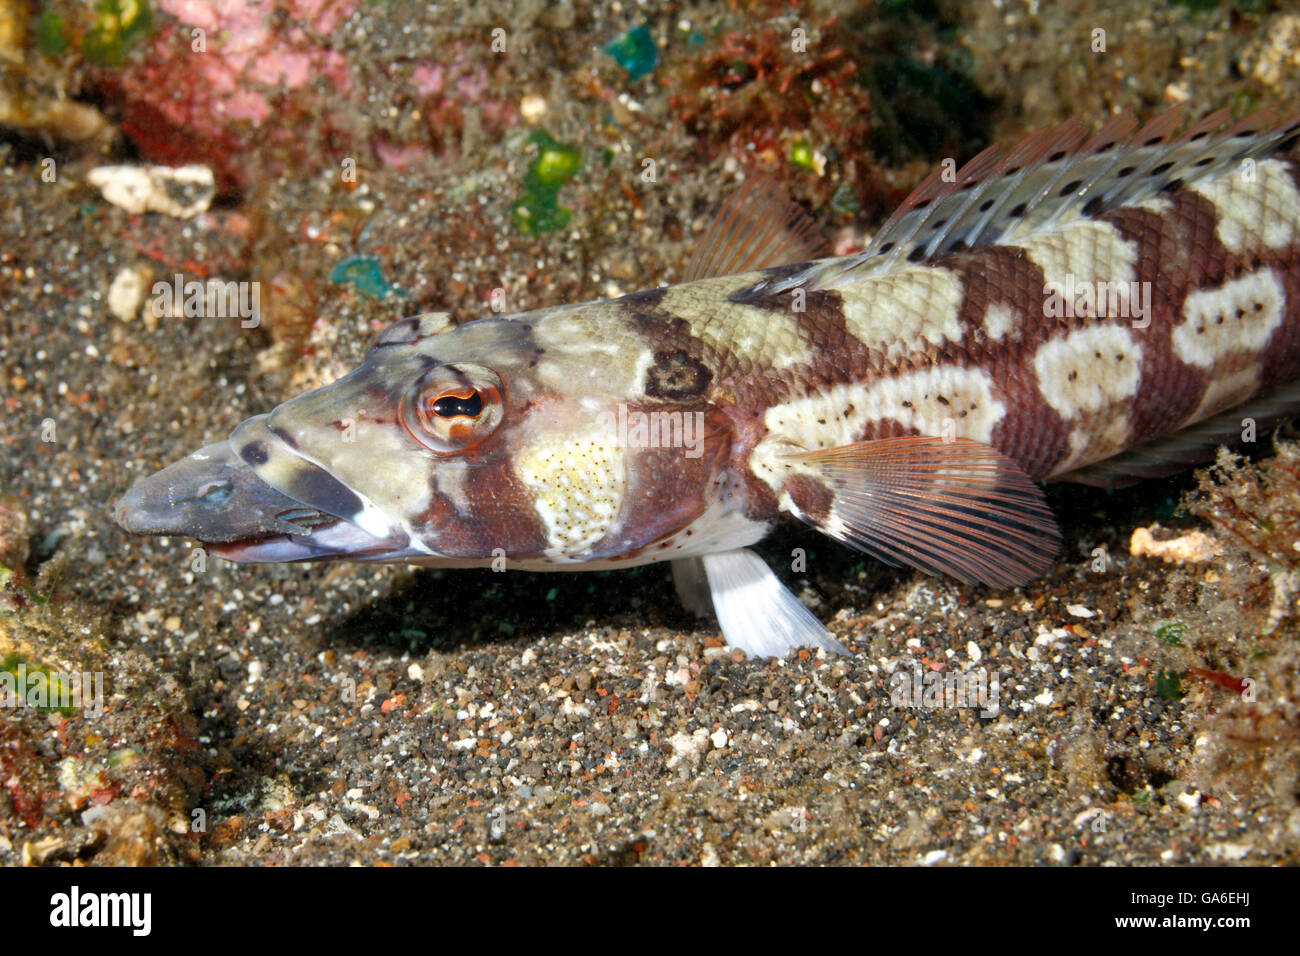 Reticulated Sandperch, Parapercis tetracantha. Also known as Black Banded Seaperch. It has caught a small leatherjacket which can be seen in its mouth Stock Photo